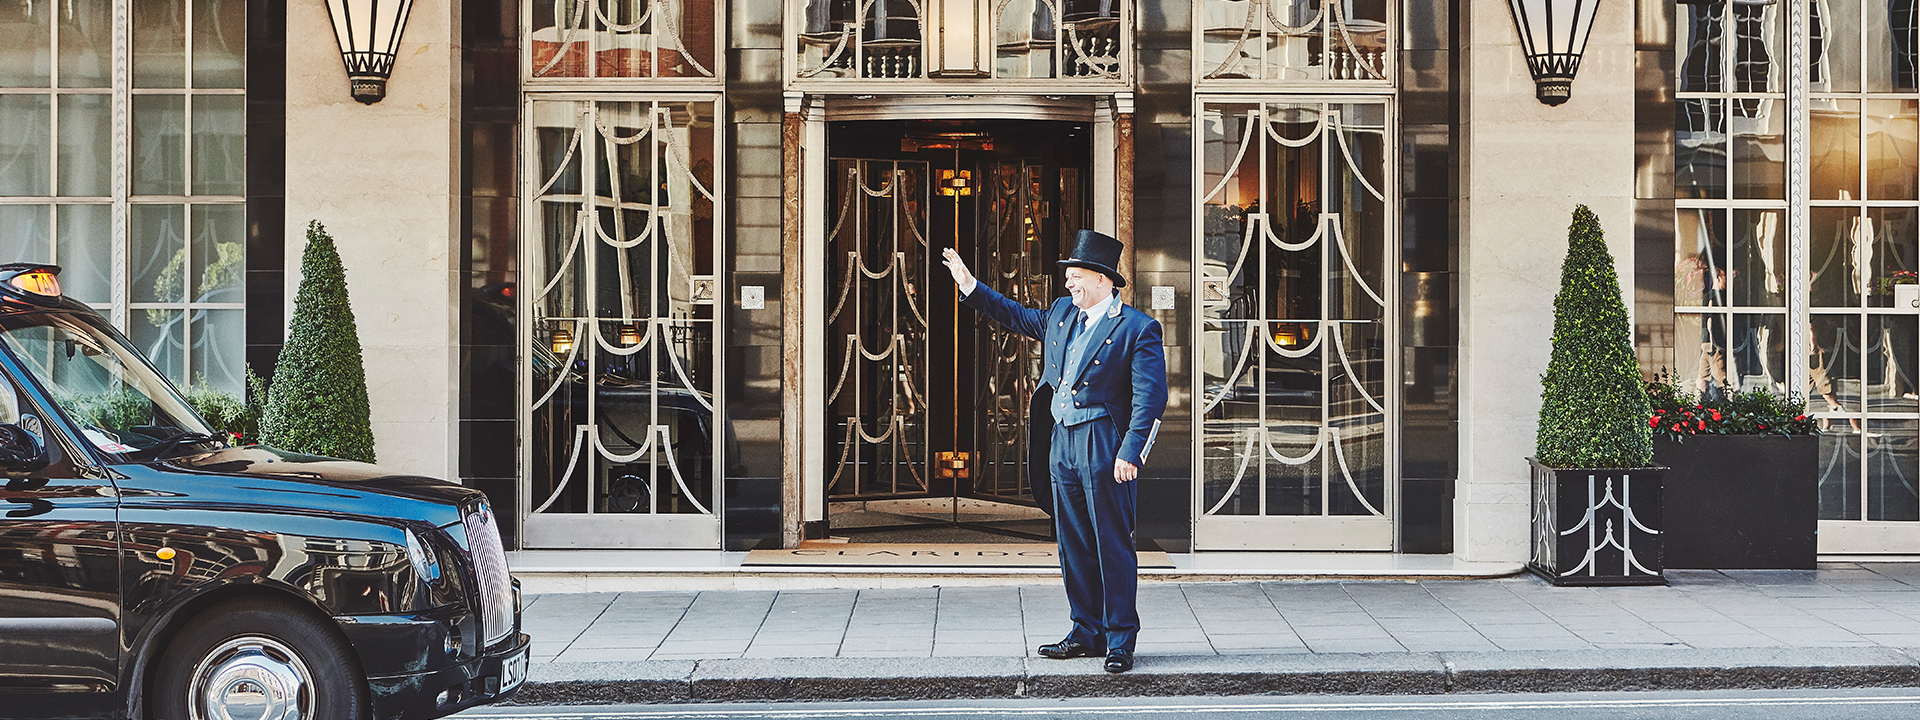 The doorman waves warmly and welcomes guests outside the entrance of Claridge's Hotel.